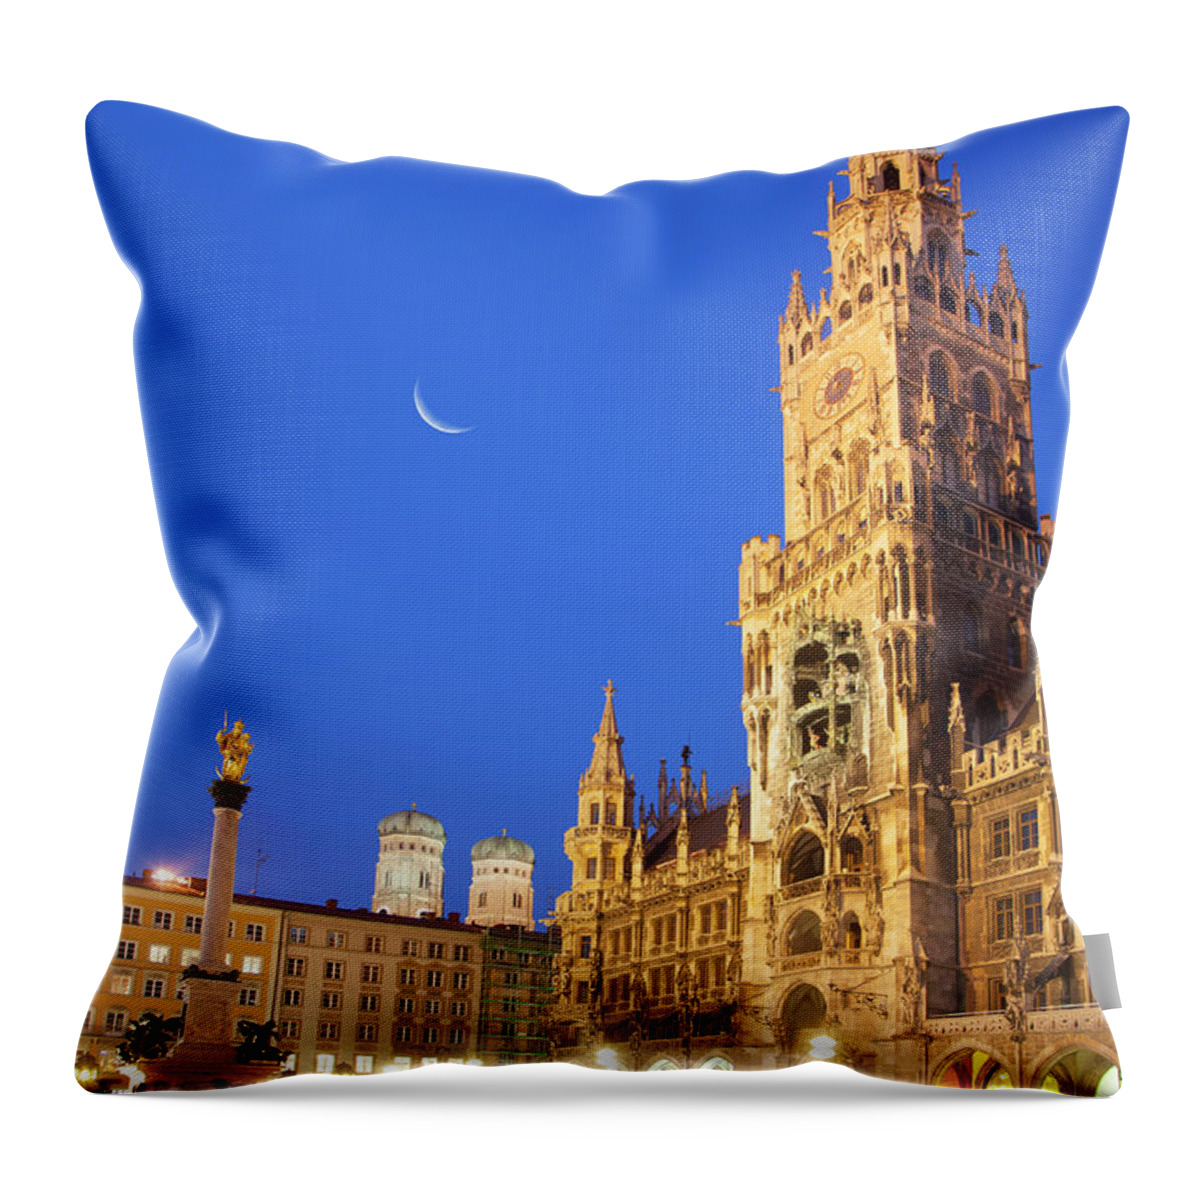 New Town Hall Throw Pillow featuring the photograph Town Square by Grant Faint